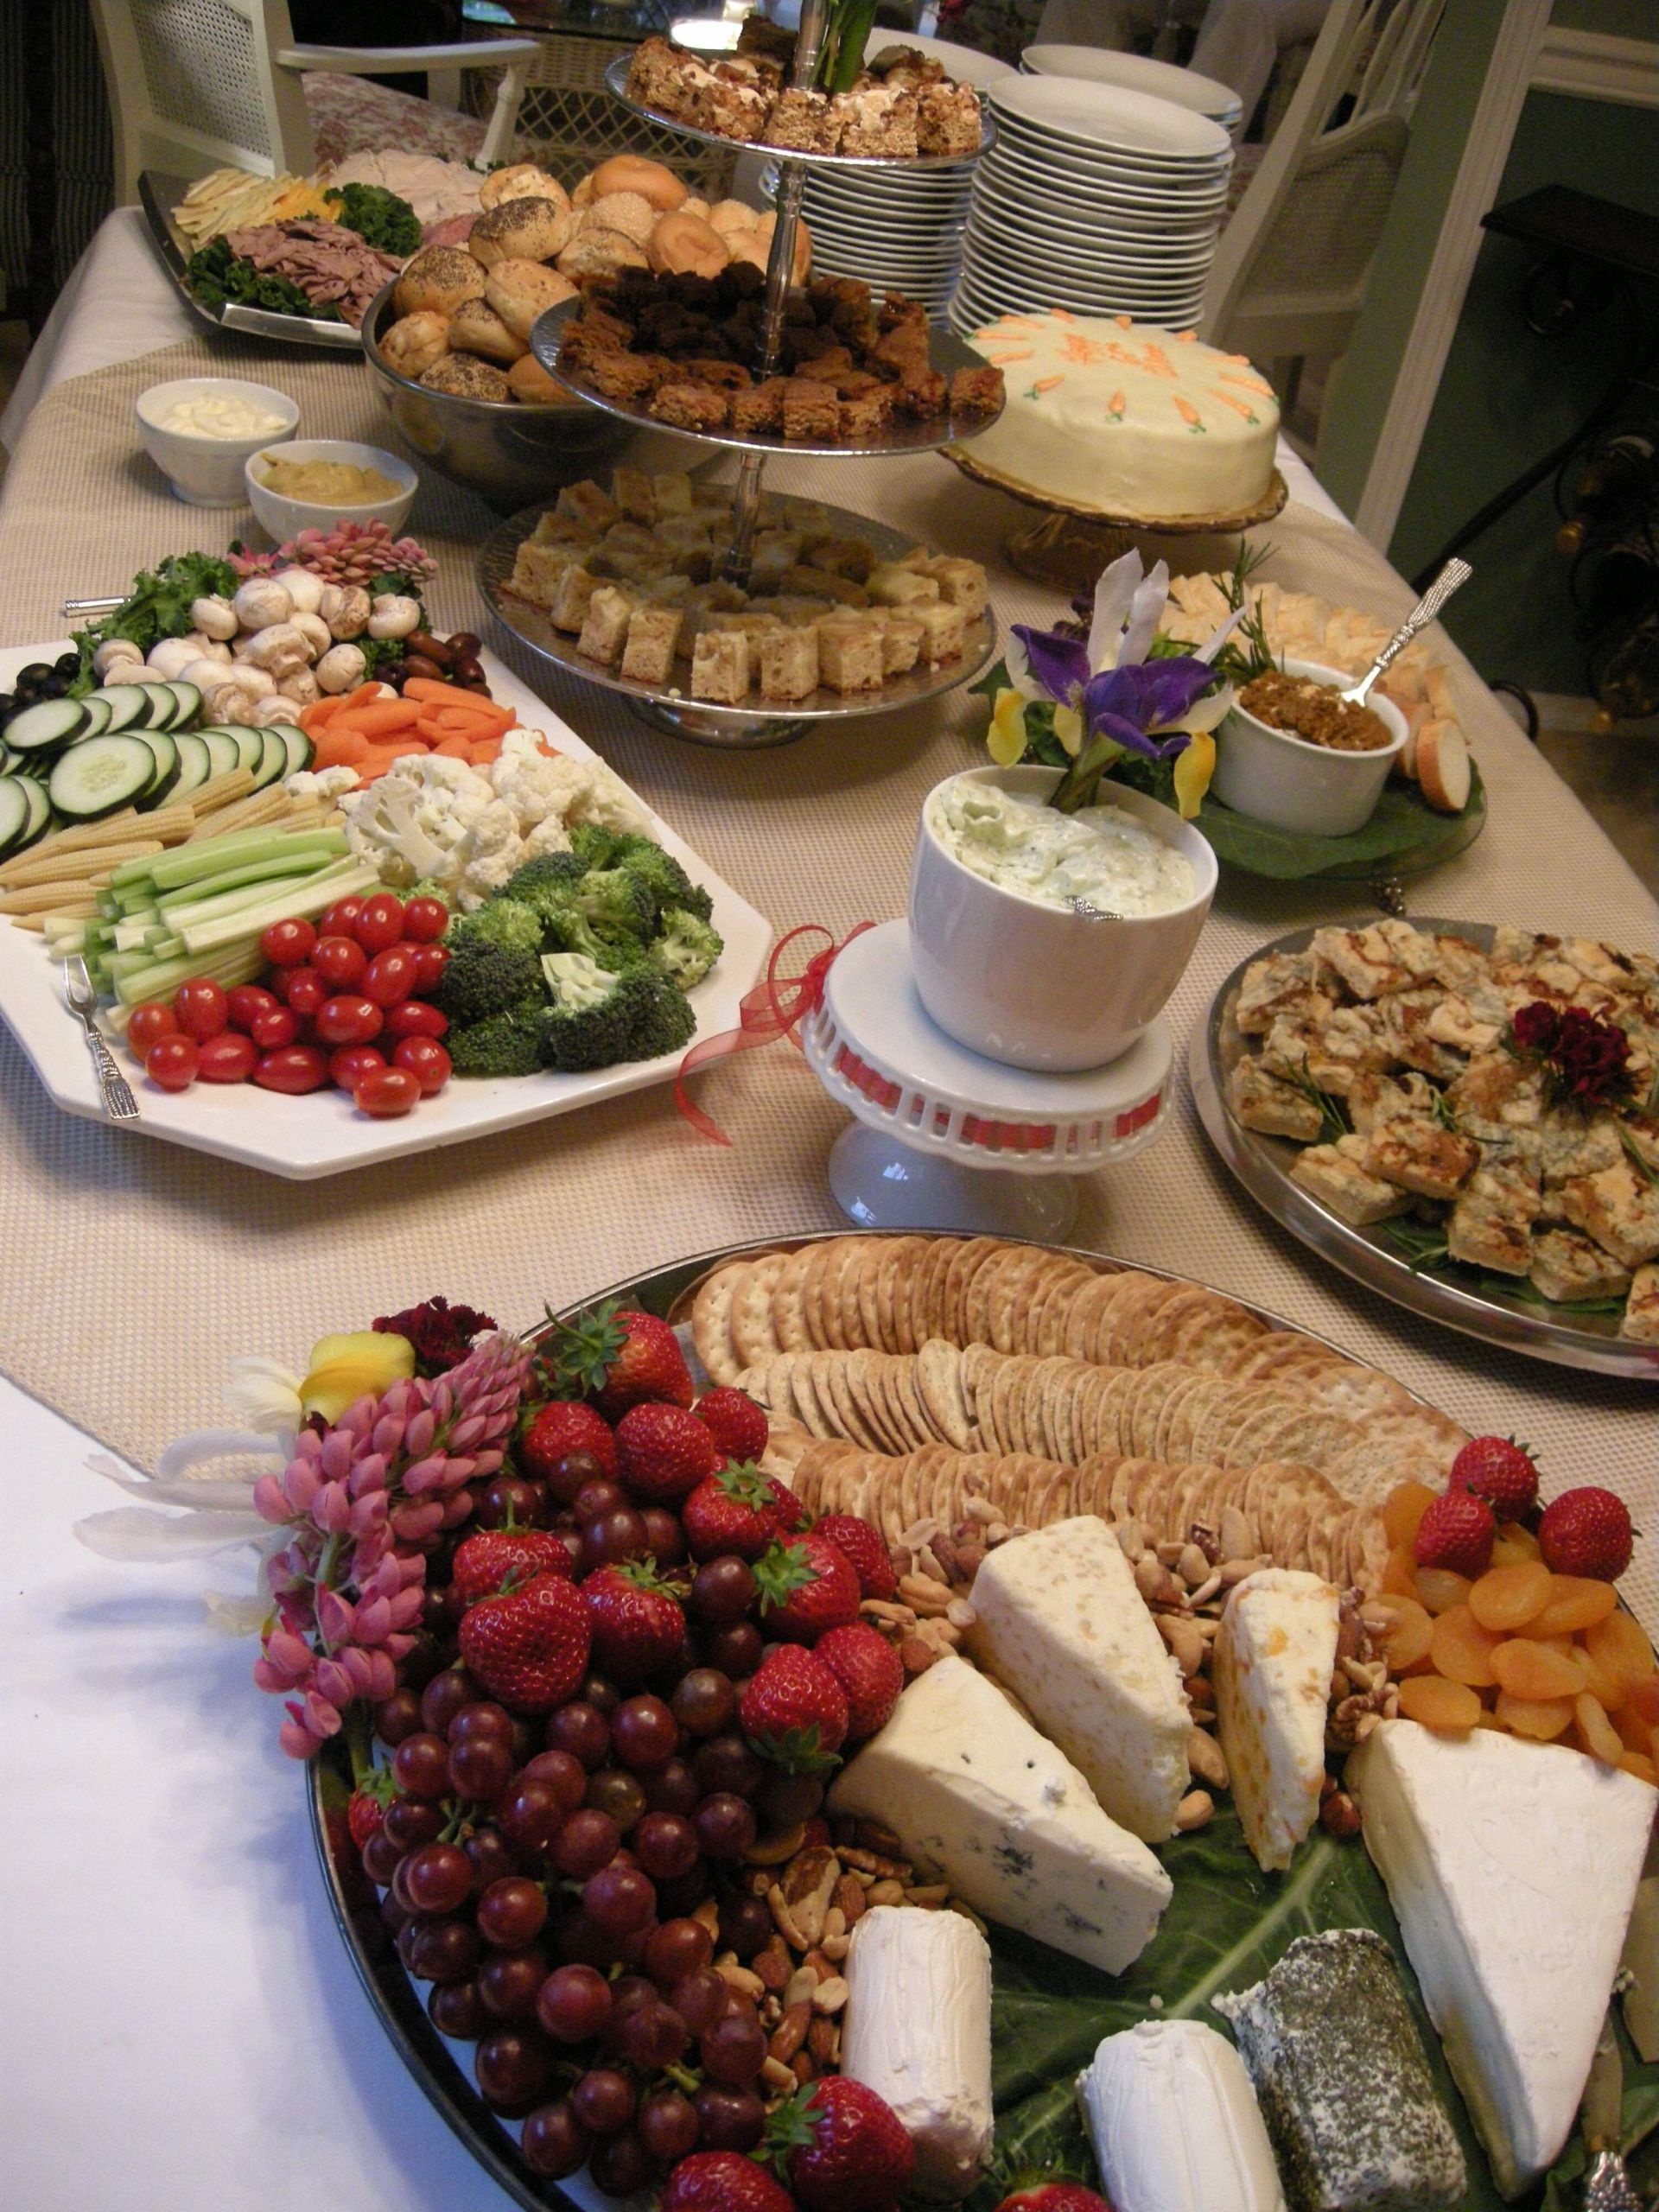 Party Food Table Ideas
 Open House In Home Buffet